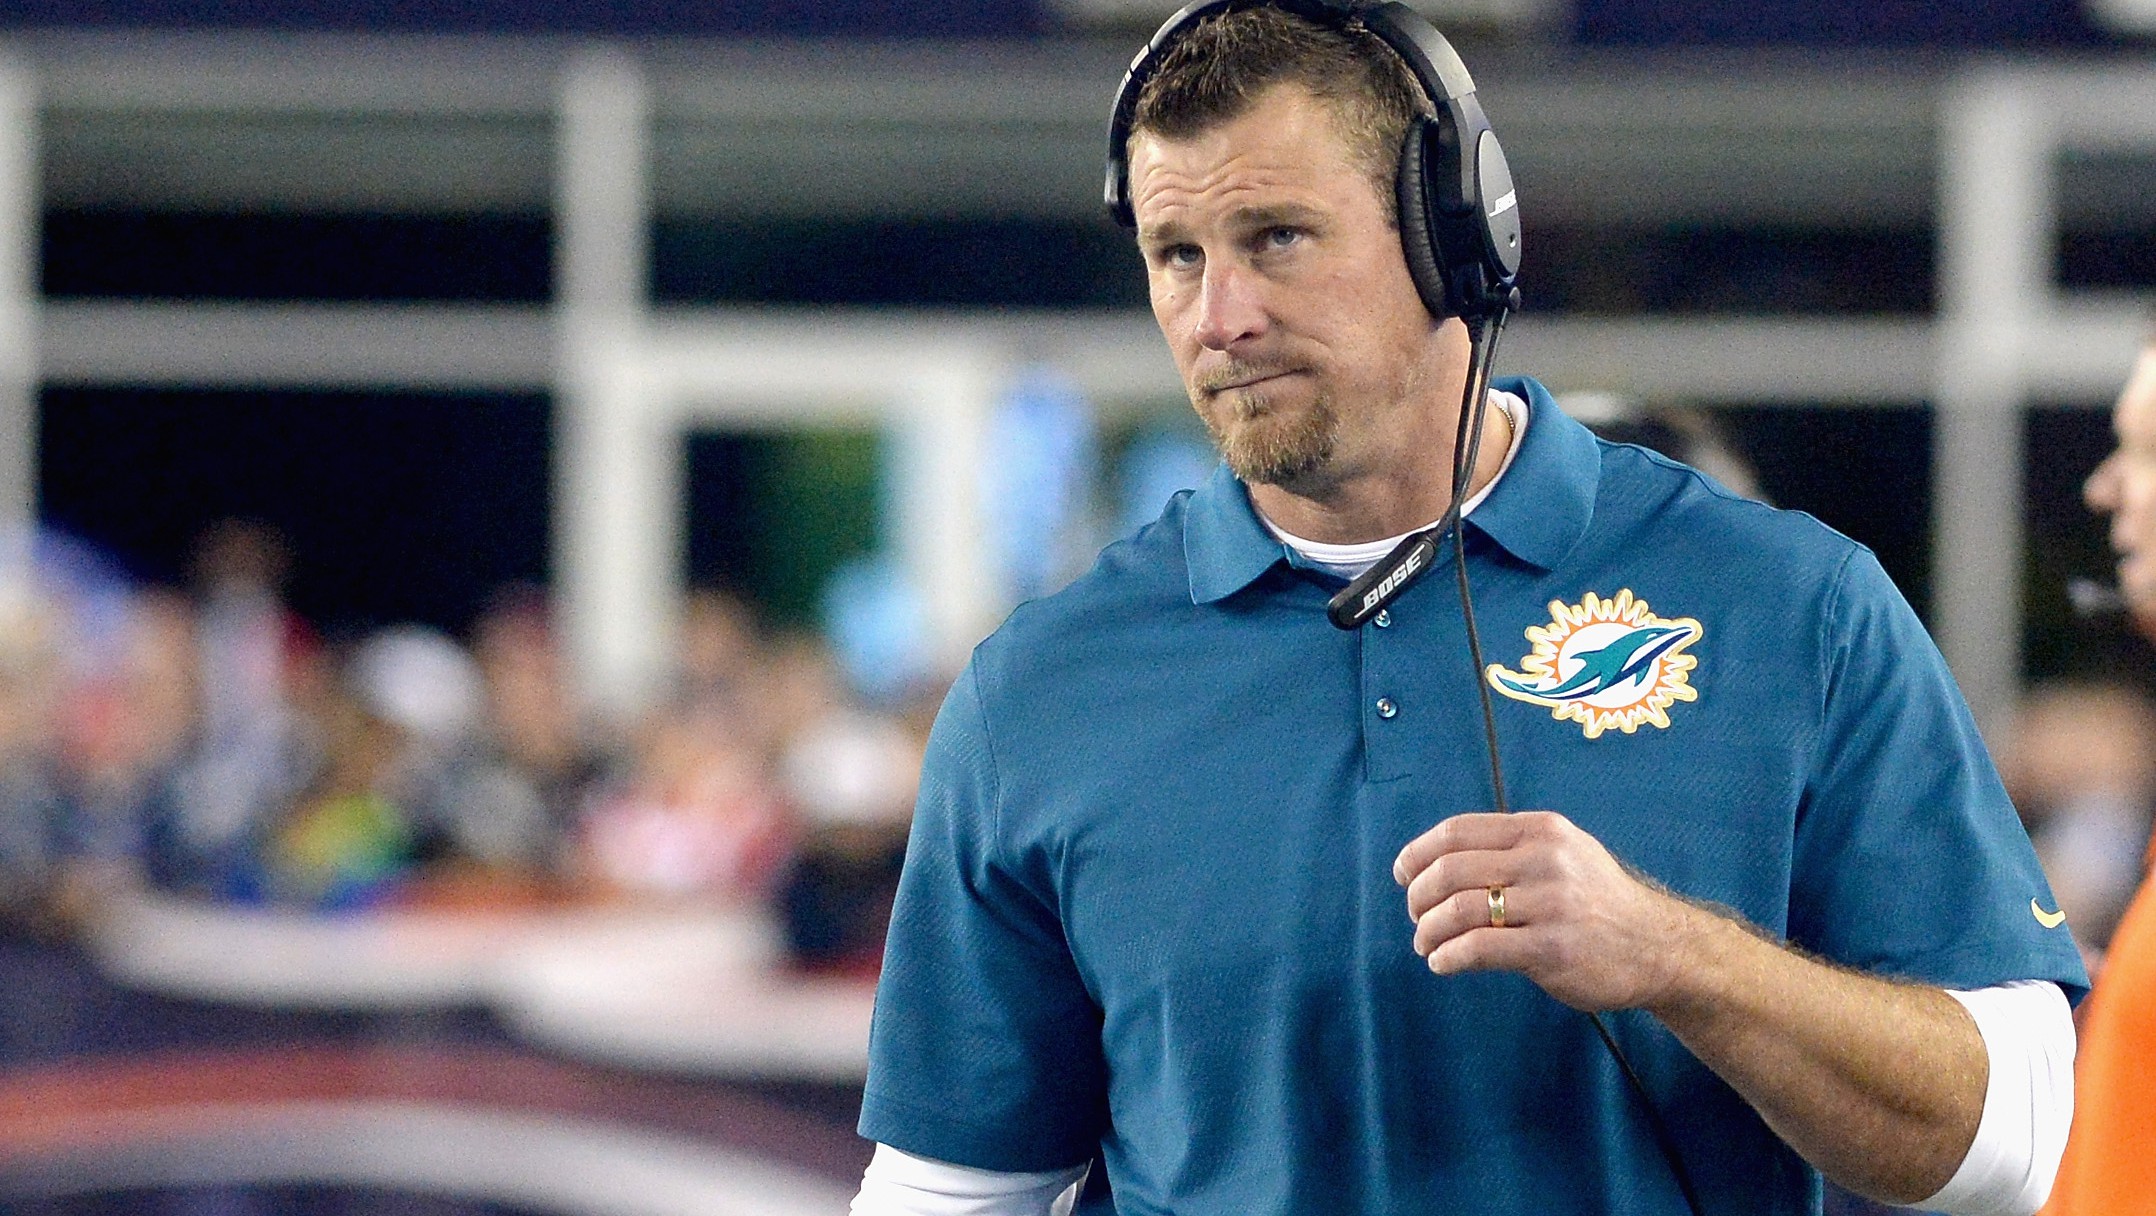 Dan Campbell: Age, Height, & Status as Dolphins Coach | Heavy.com